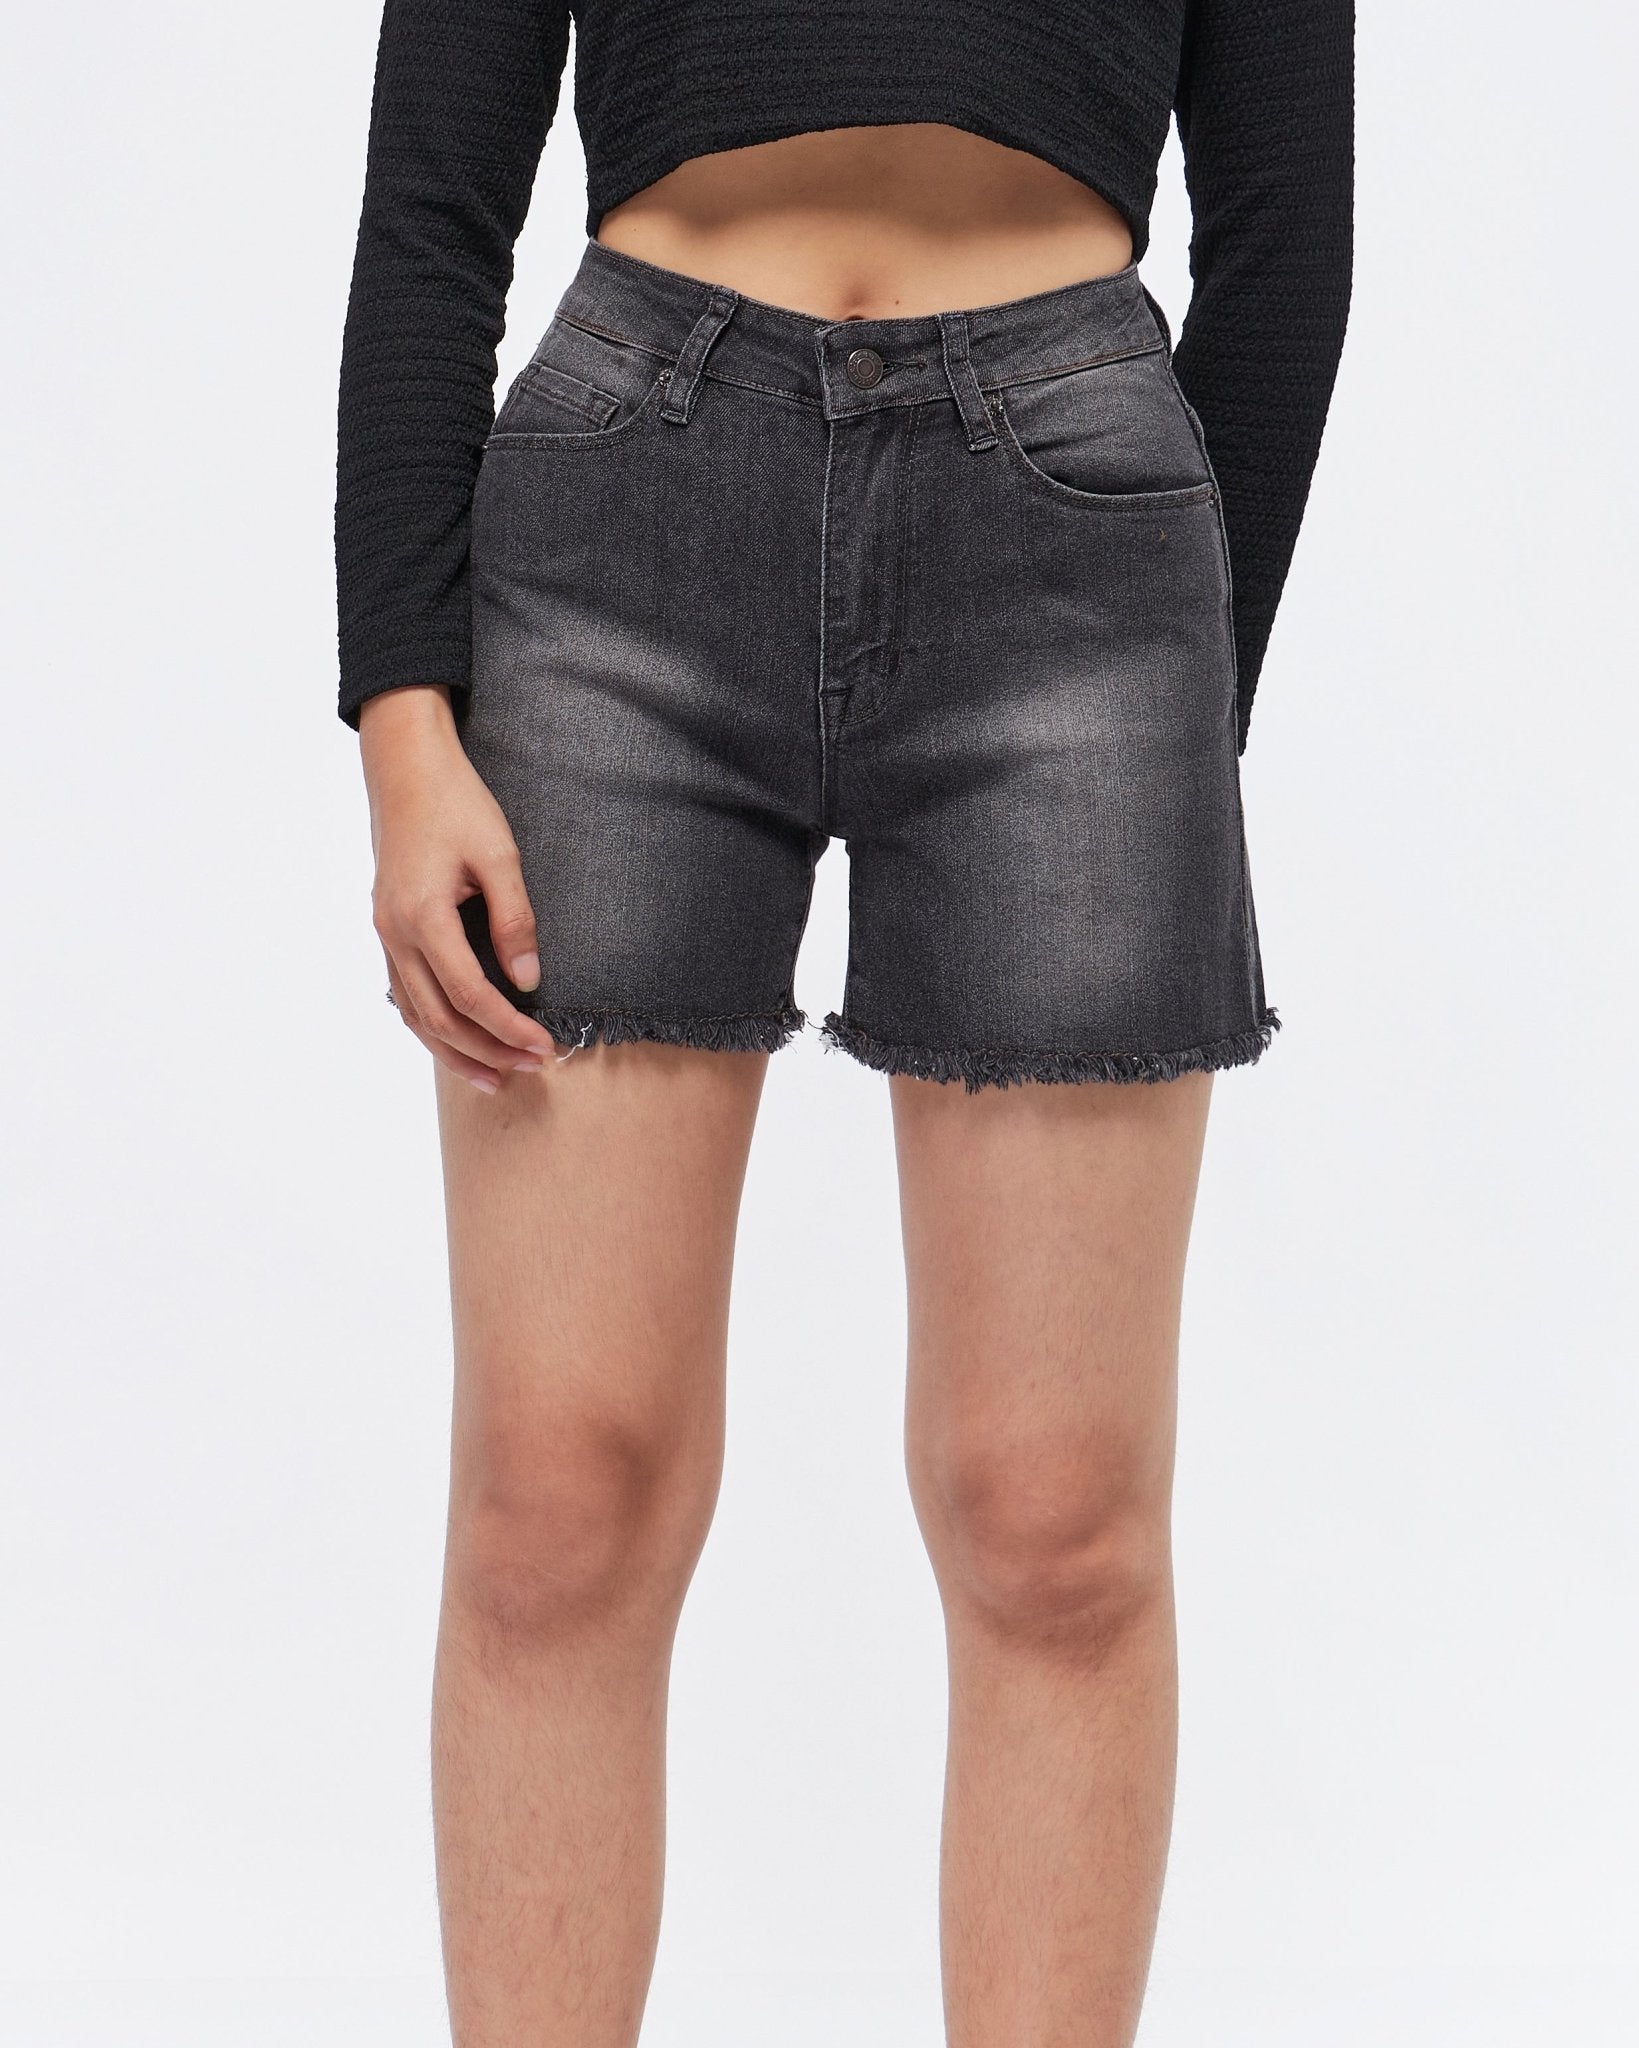 MOI OUTFIT-Raw Hem Lady Short Jeans 14.90